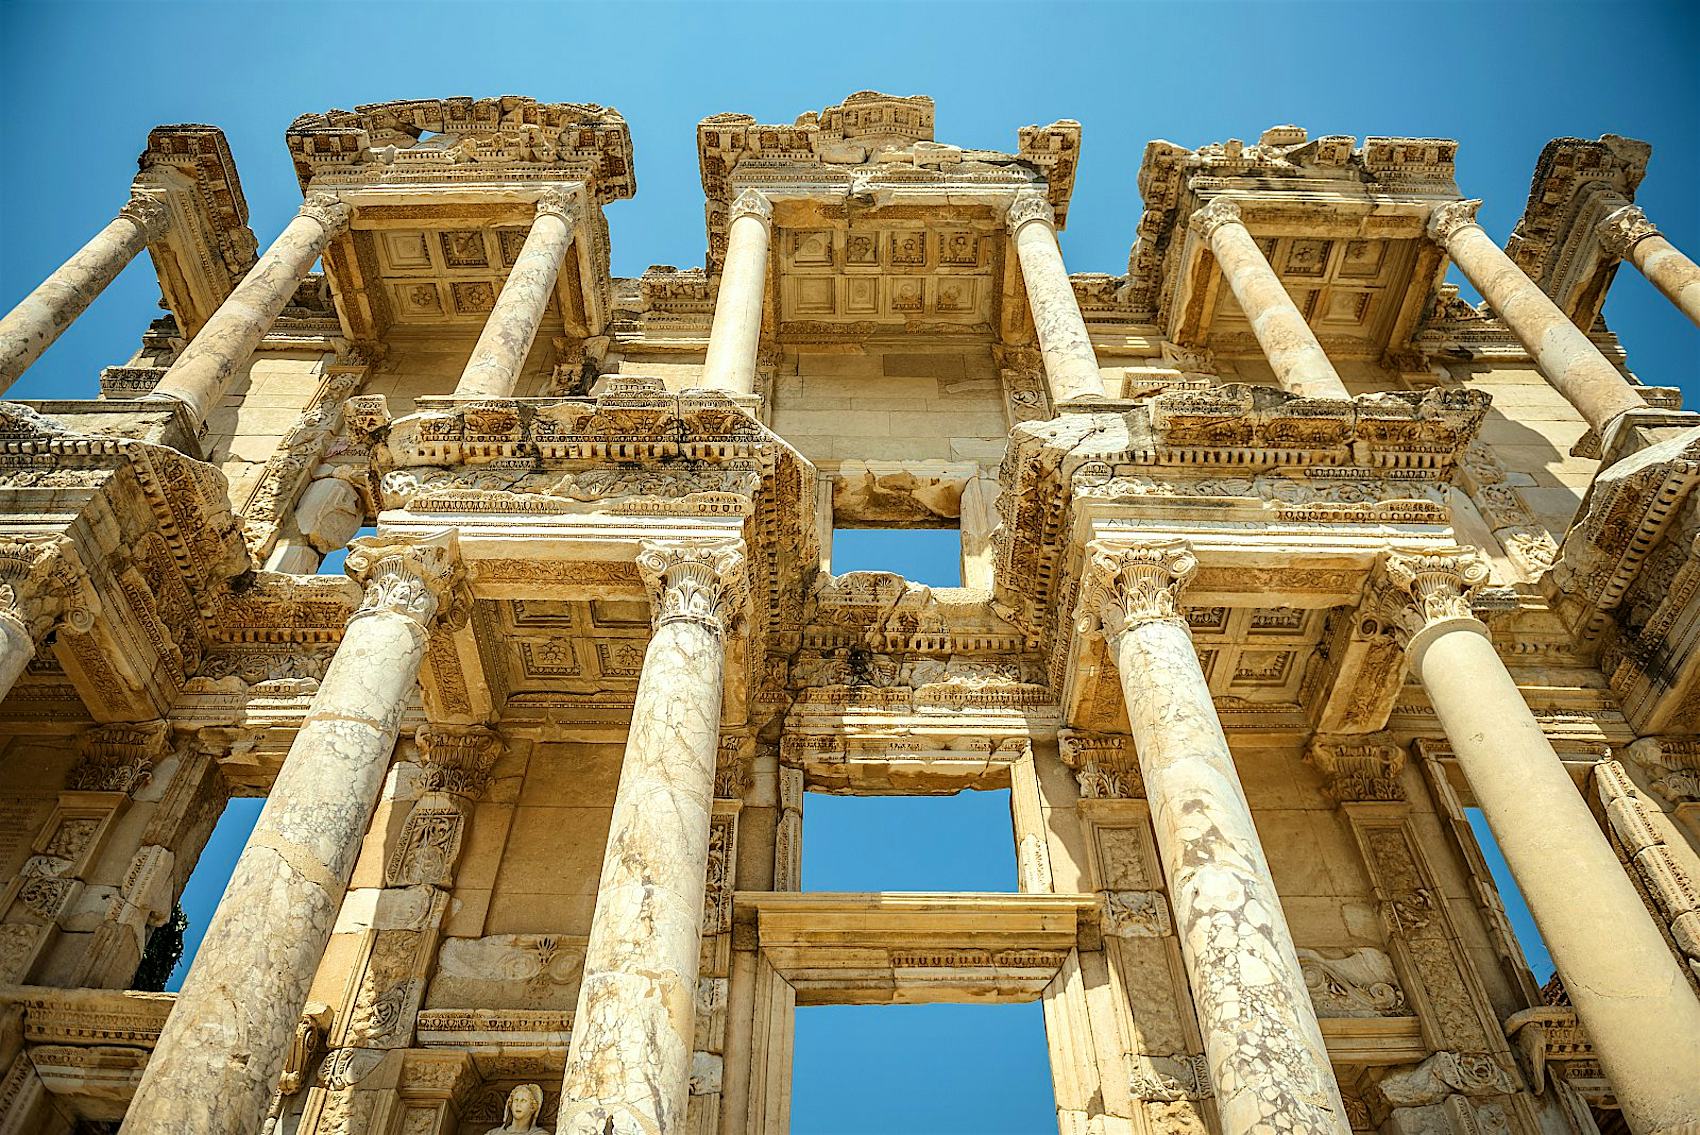 The façade of the Library of Celsus at Ephesus